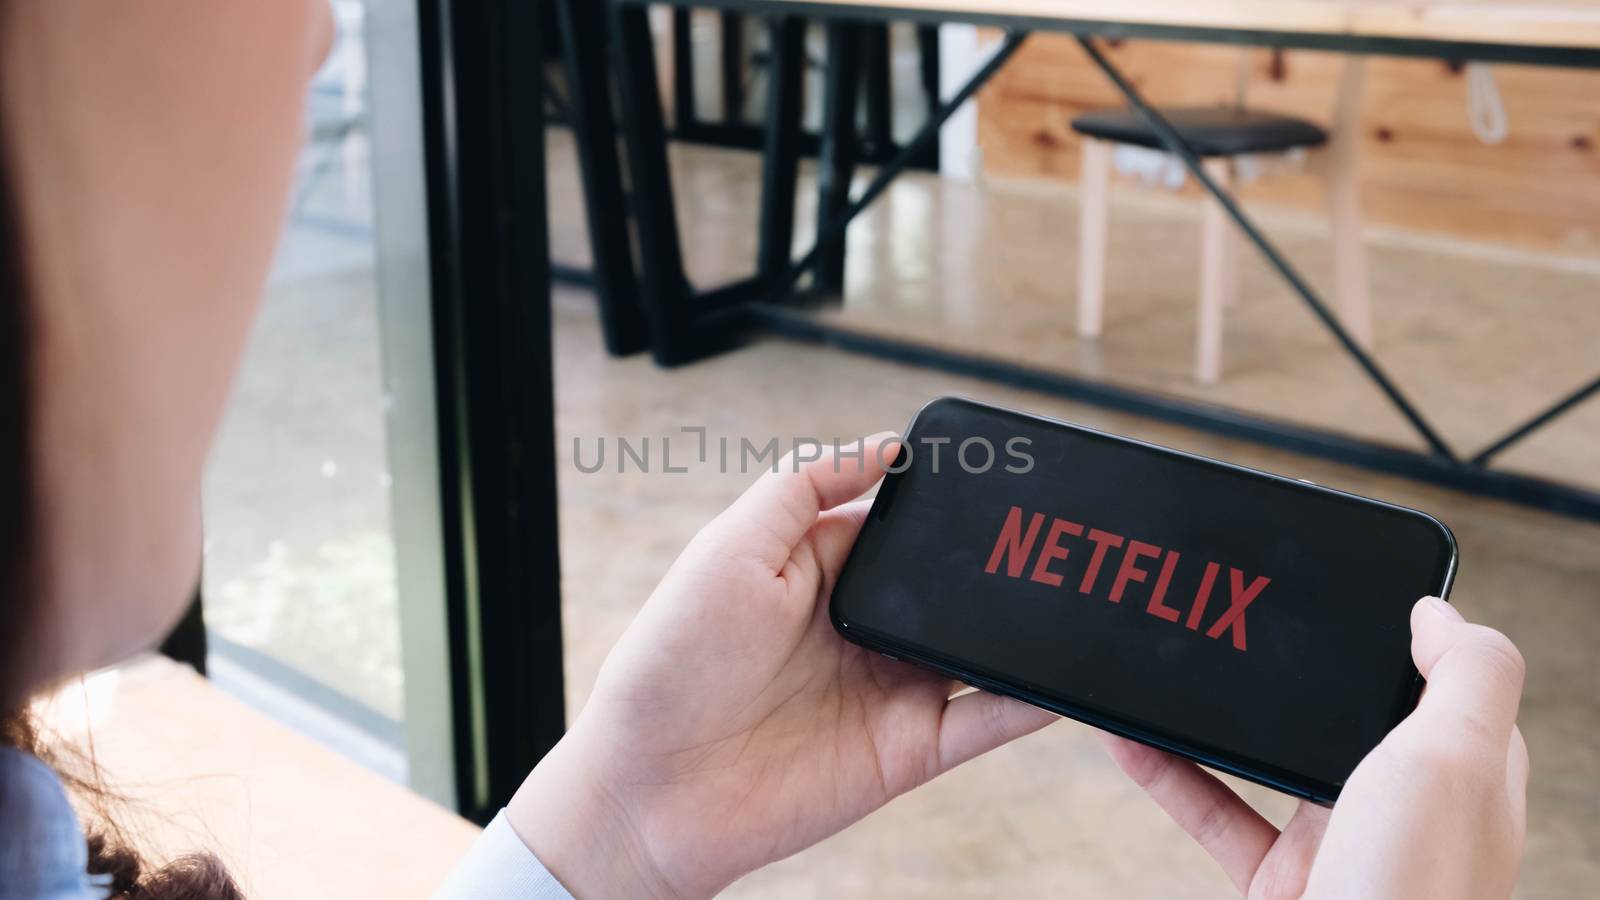 CHIANG MAI, THAILAND, JUN 7 , 2020: Young woman in a hammock opening Netflix in her smartphone. Millennial girl resting with her cell phone in her hands and the Netflix logo in the screen.
